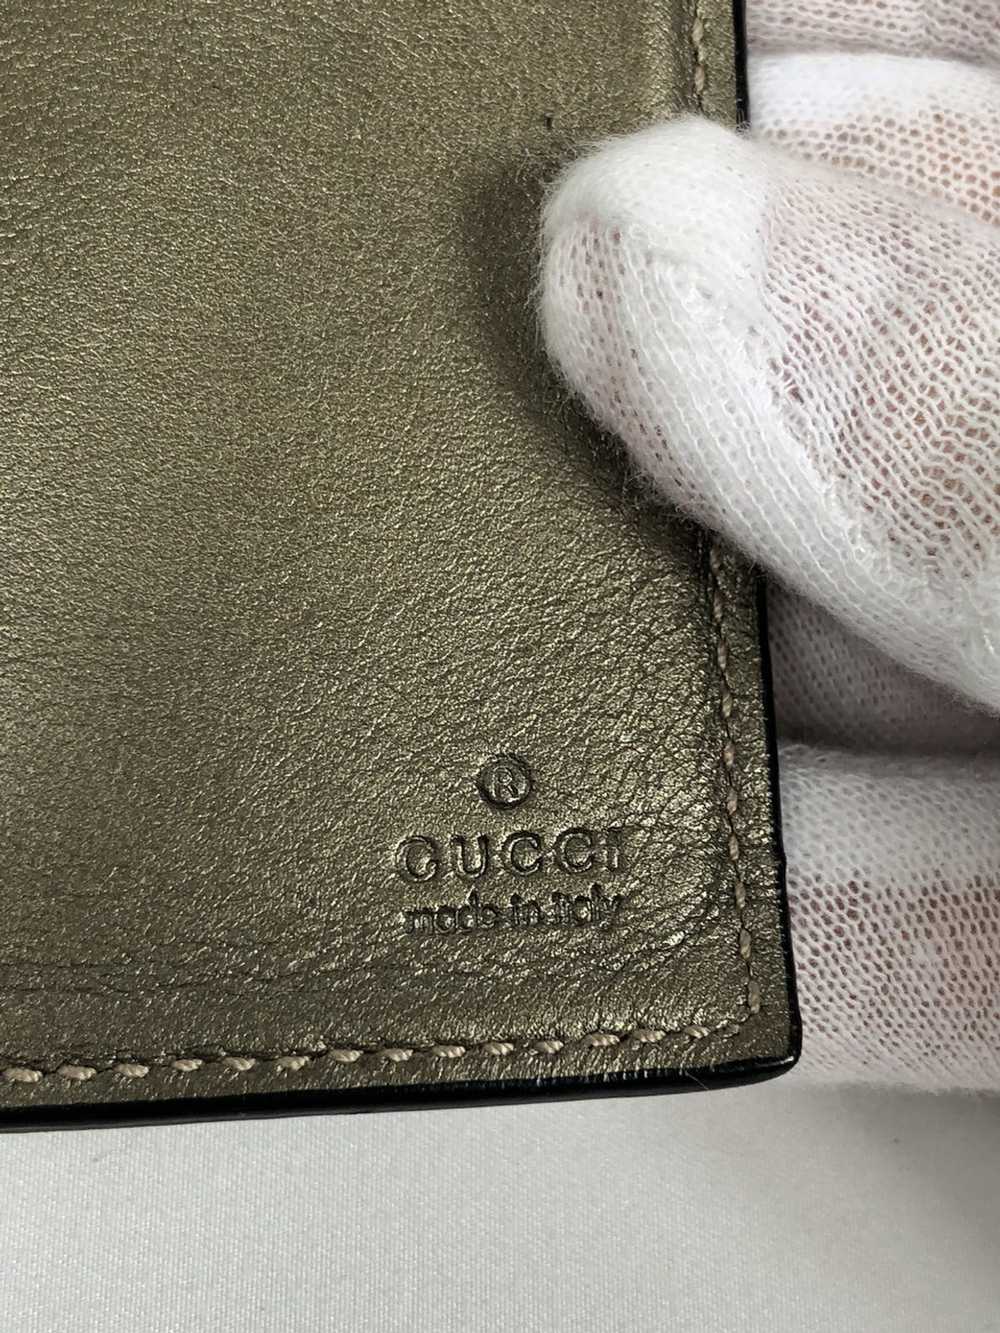 Gucci Gucci gg guccissima leather long wallet - image 4